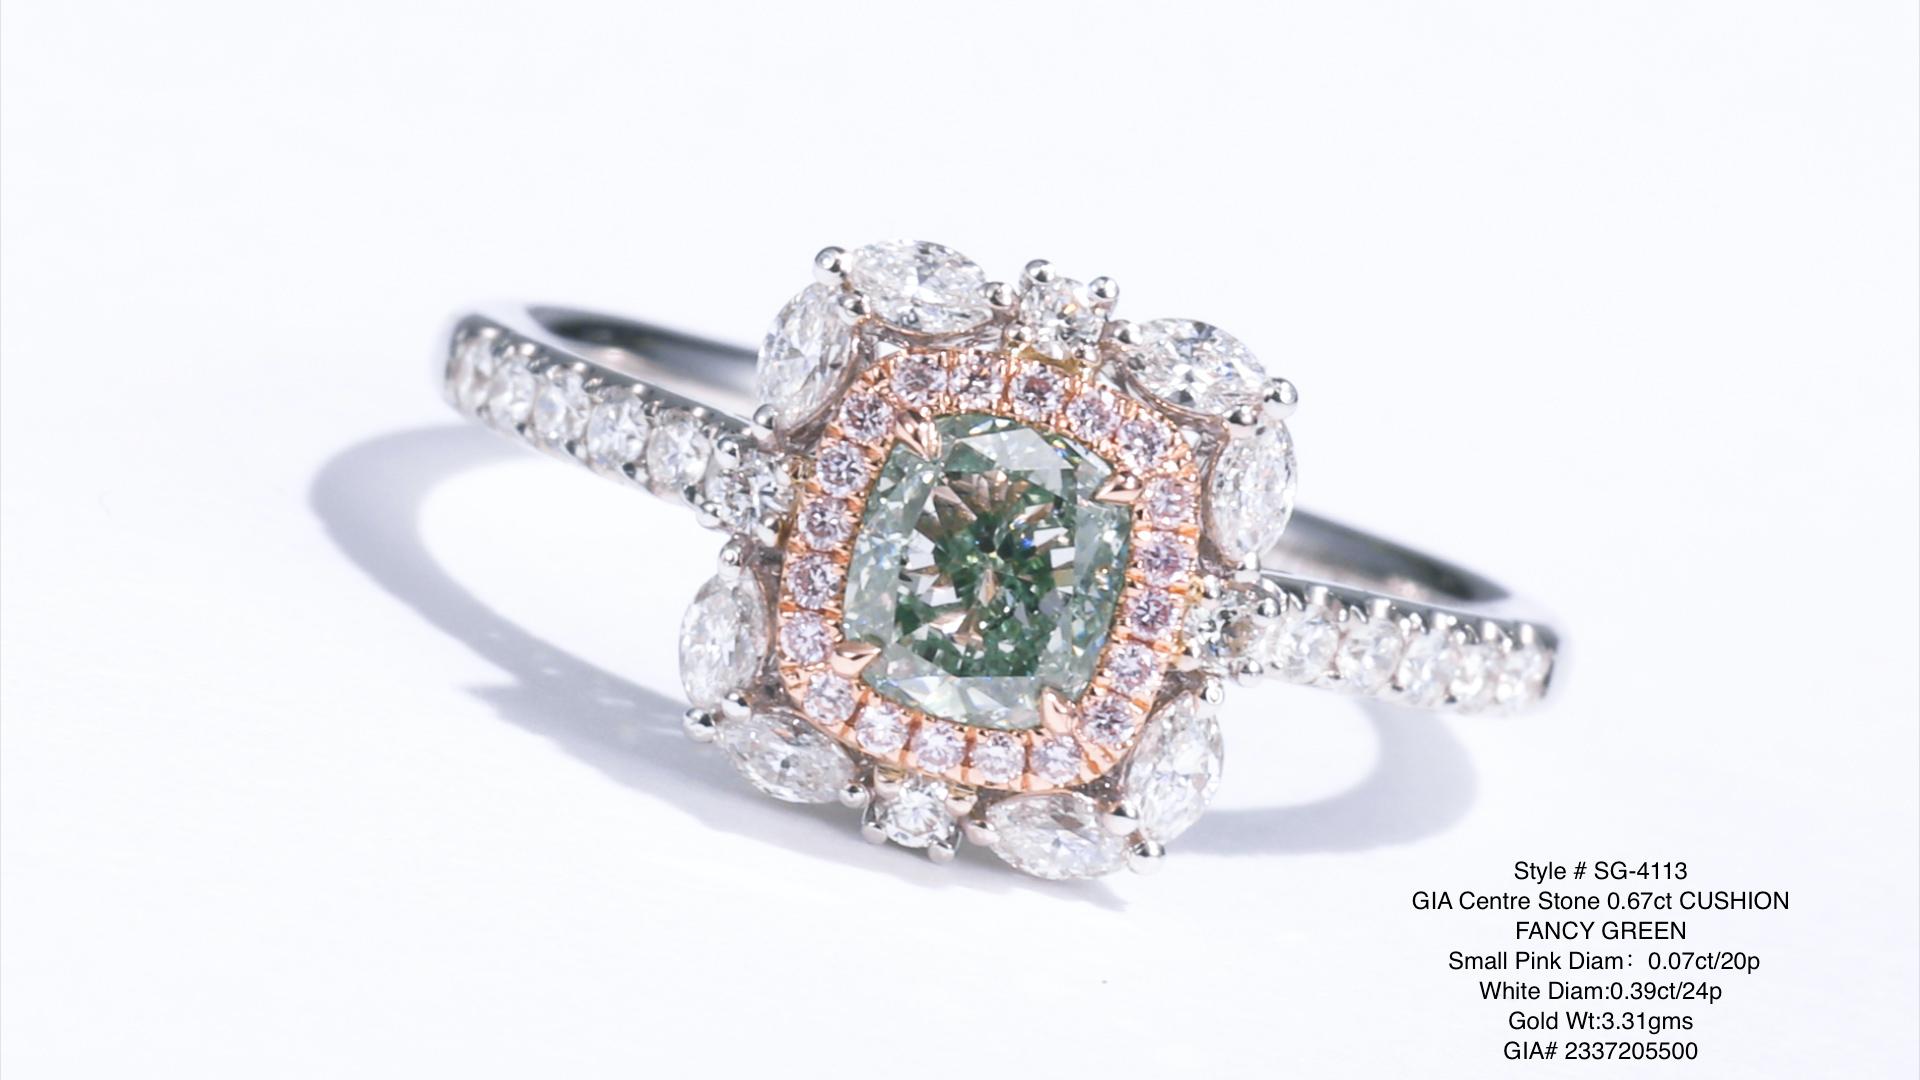 A 0.67-carat cushion-shaped natural fancy green GIA certified diamond. Set on an 18kt gold band, this ring exudes elegance and sophistication.

The cushion shape of the diamond adds a touch of vintage charm and romantic allure to the design. Its